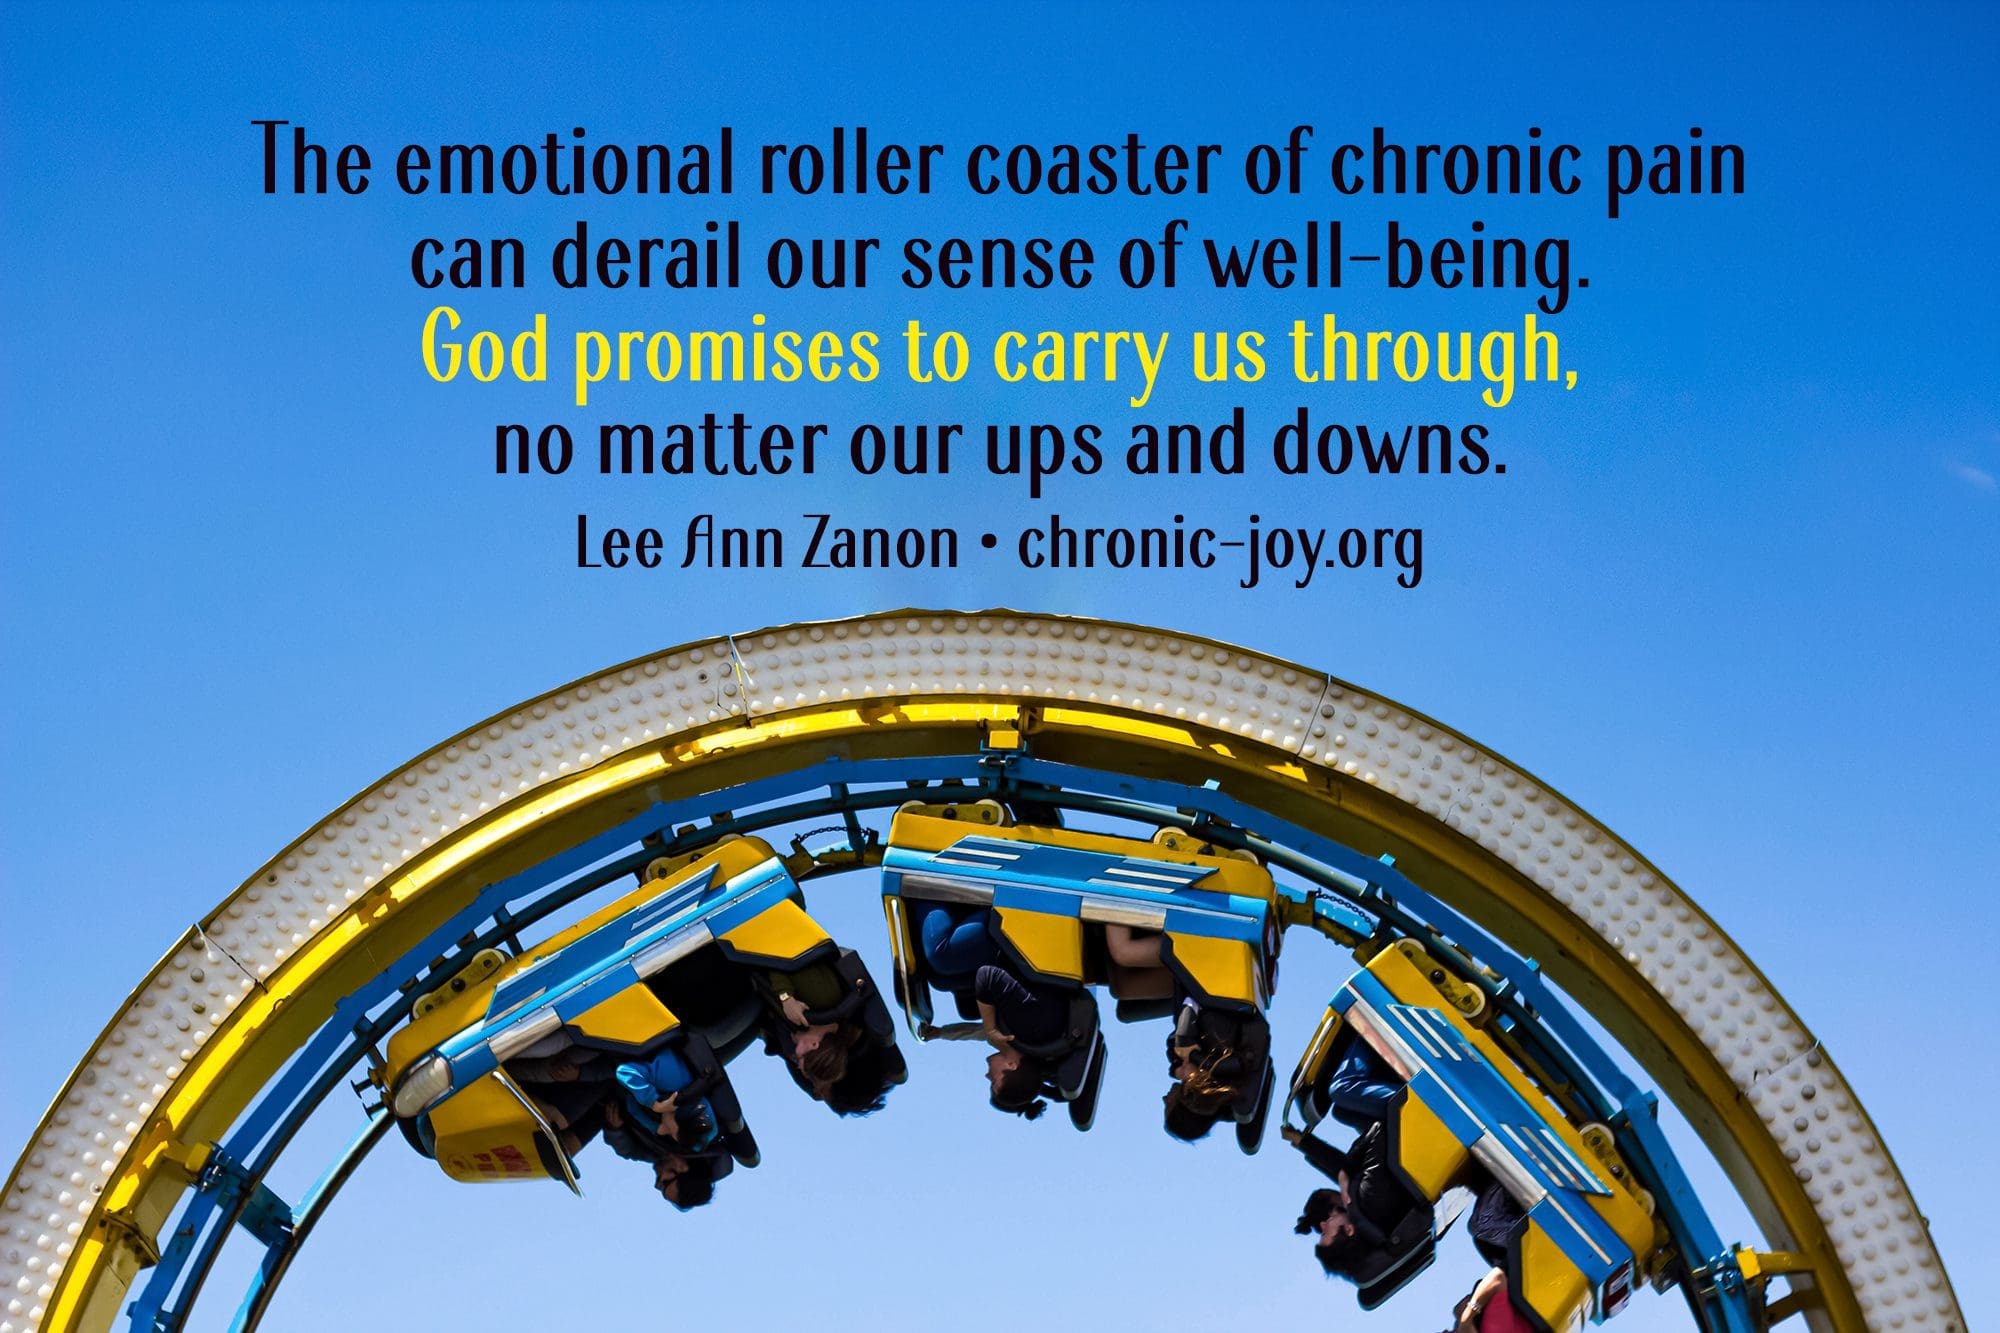 "The emotional roller coaster of chronic pain can derail our sense of well-being. God promises to carry us through, no matter our ups and downs." Lee Ann Zanon